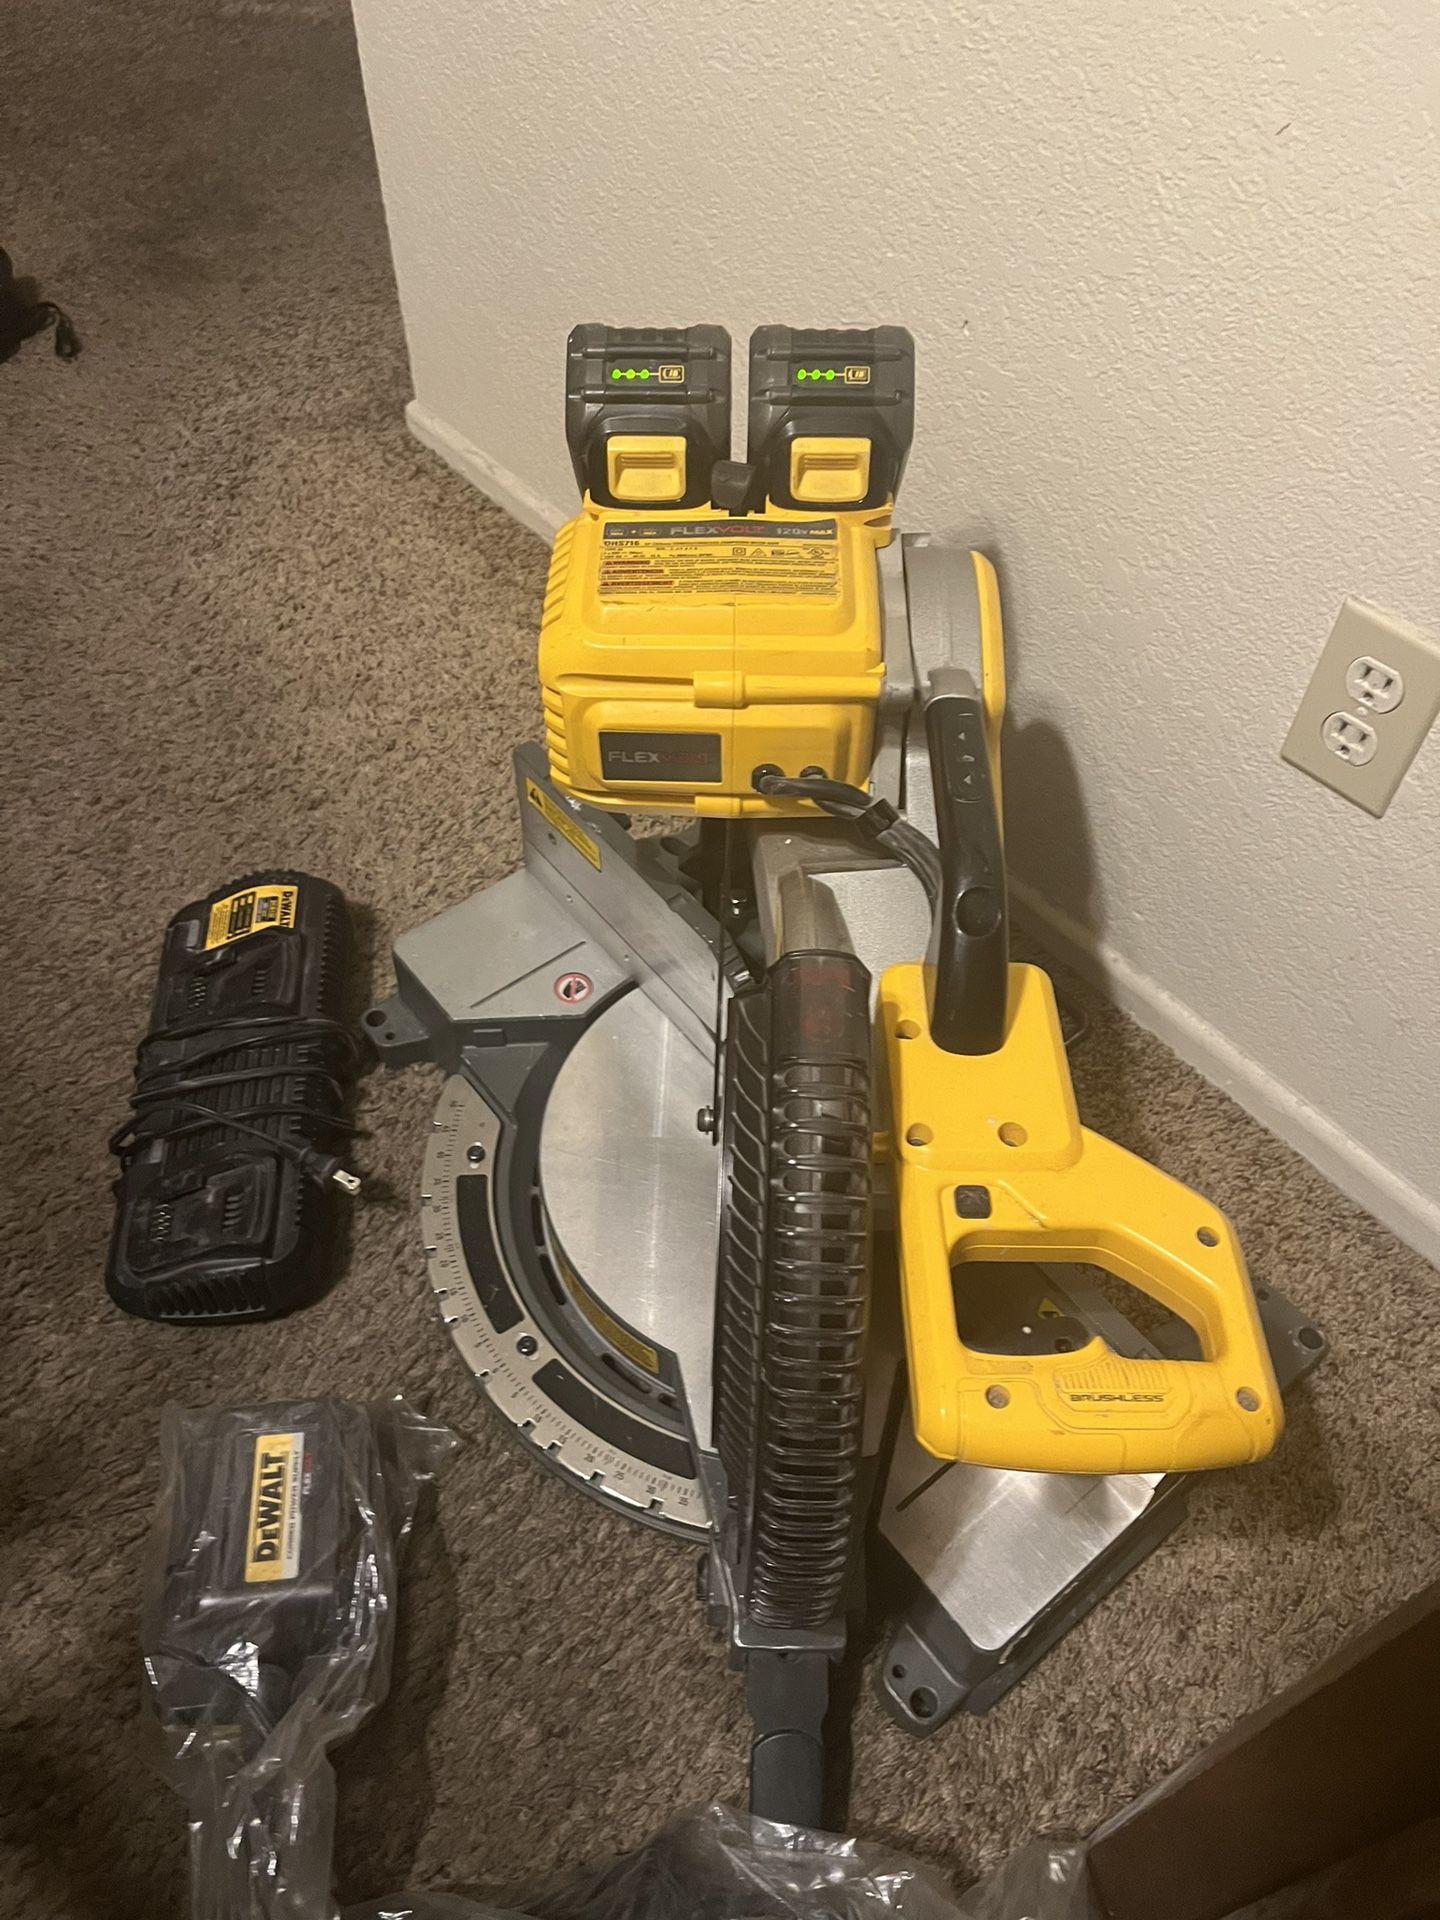 Dewalt Mitter Saw Batteries And Cord Adapter 